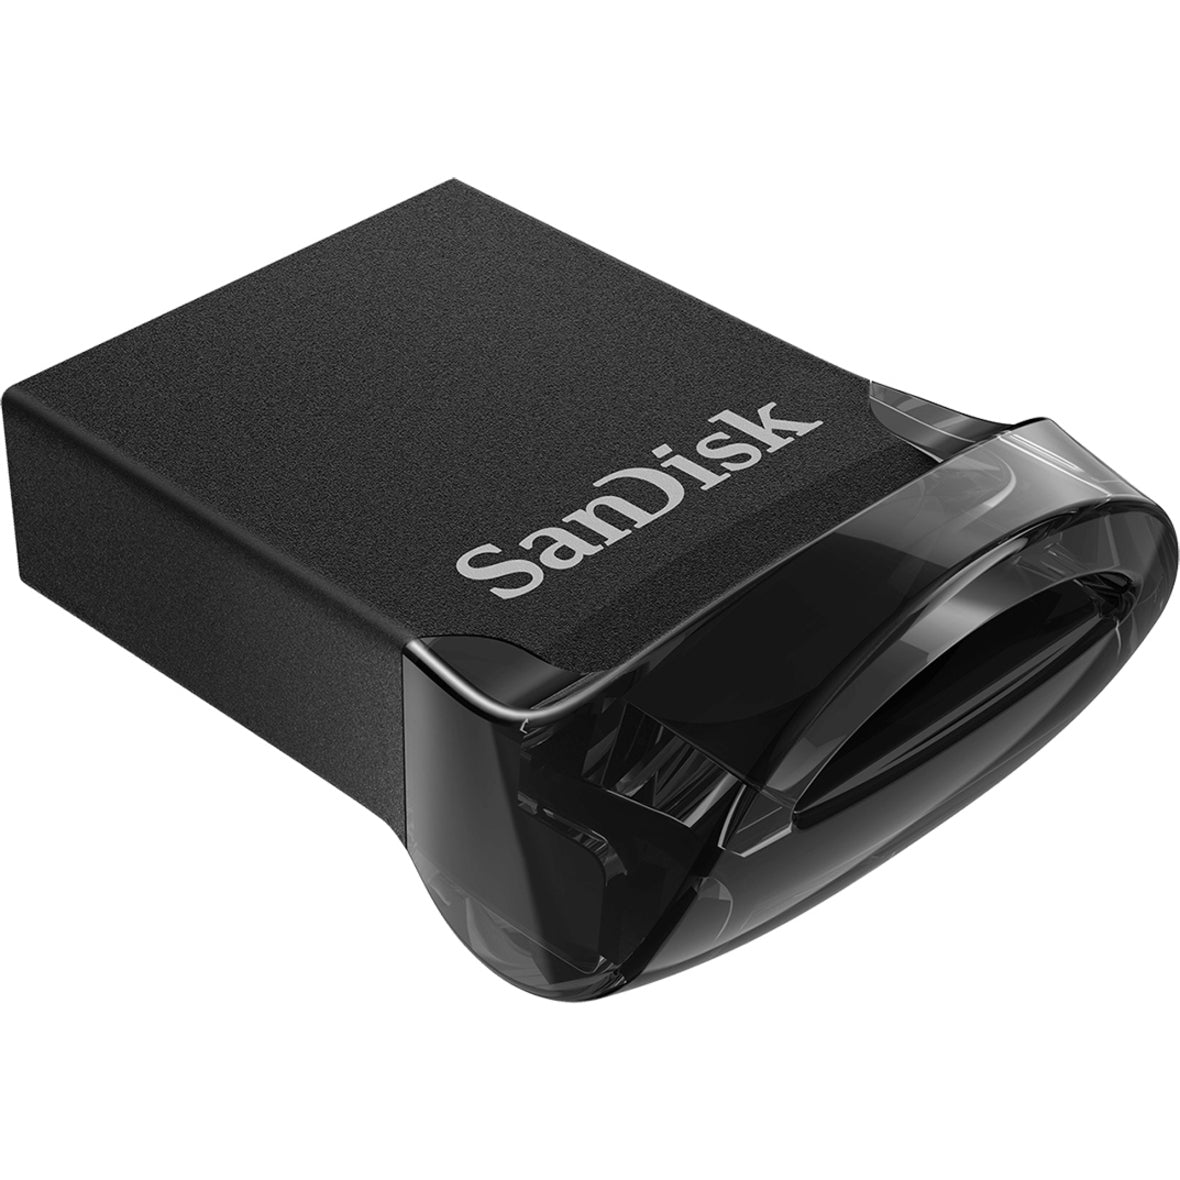 SanDisk SDCZ430-512G-A46 Ultra Fit USB 3.1 Flash Drive 512GB, High-Speed Data Storage Solution